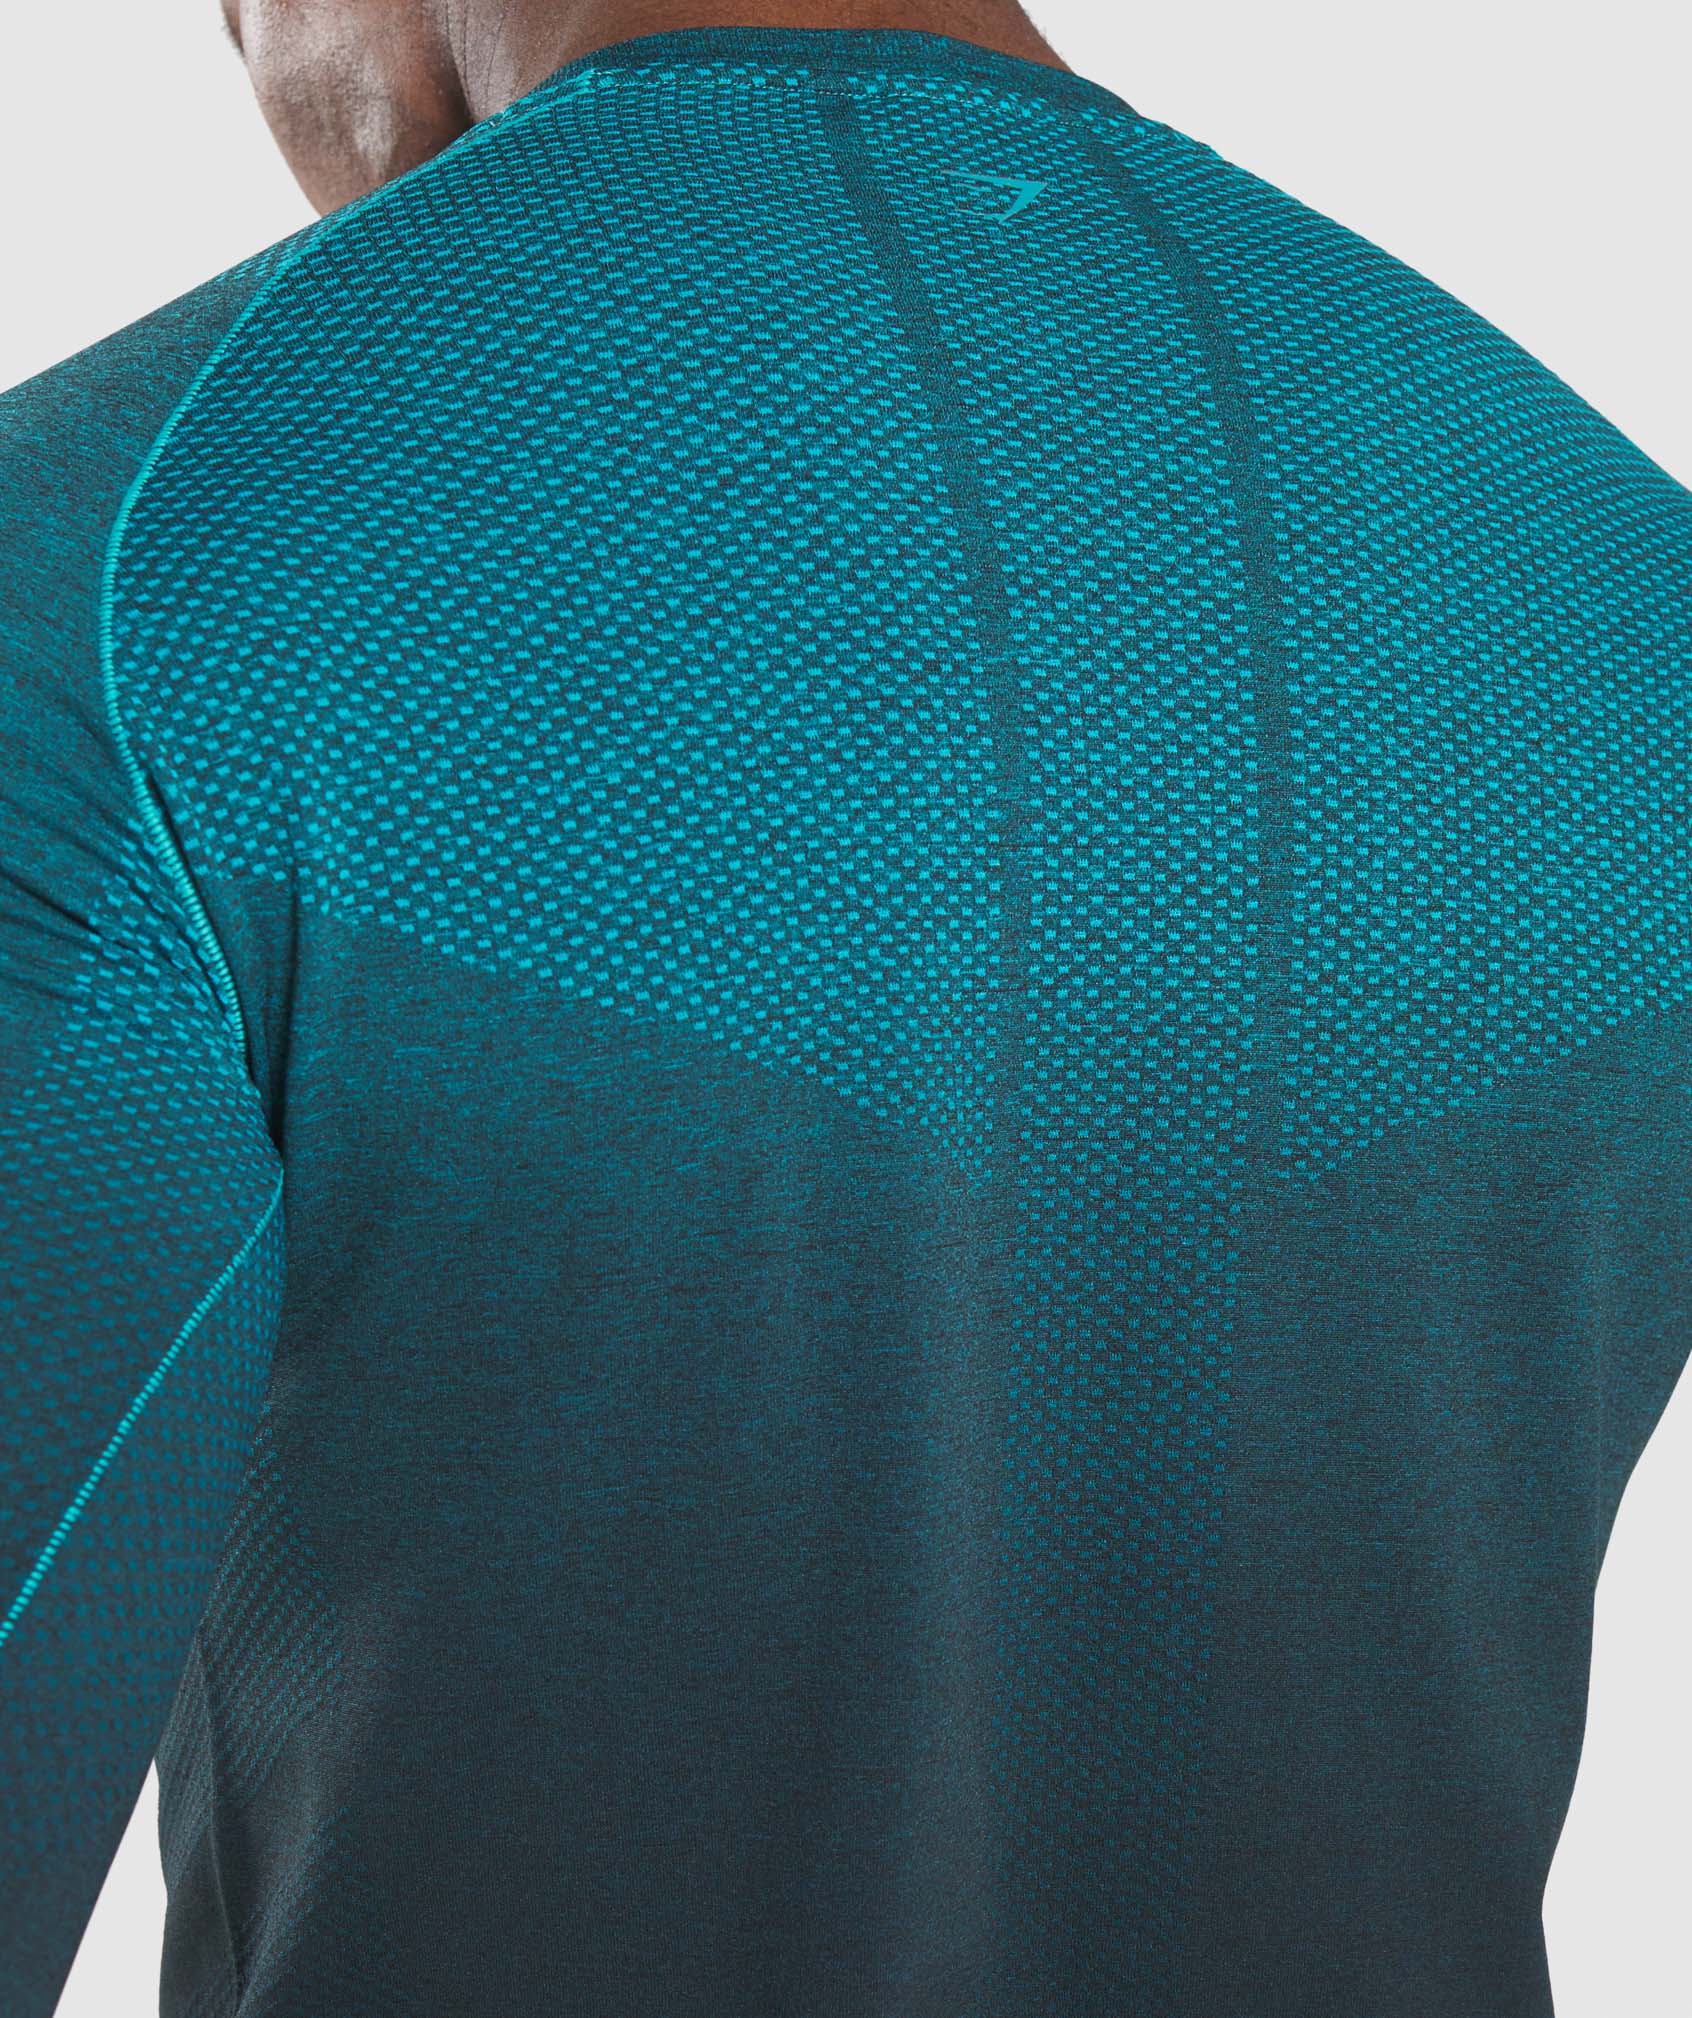 Vital Ombre Seamless Long Sleeve T-Shirt in Black/Teal